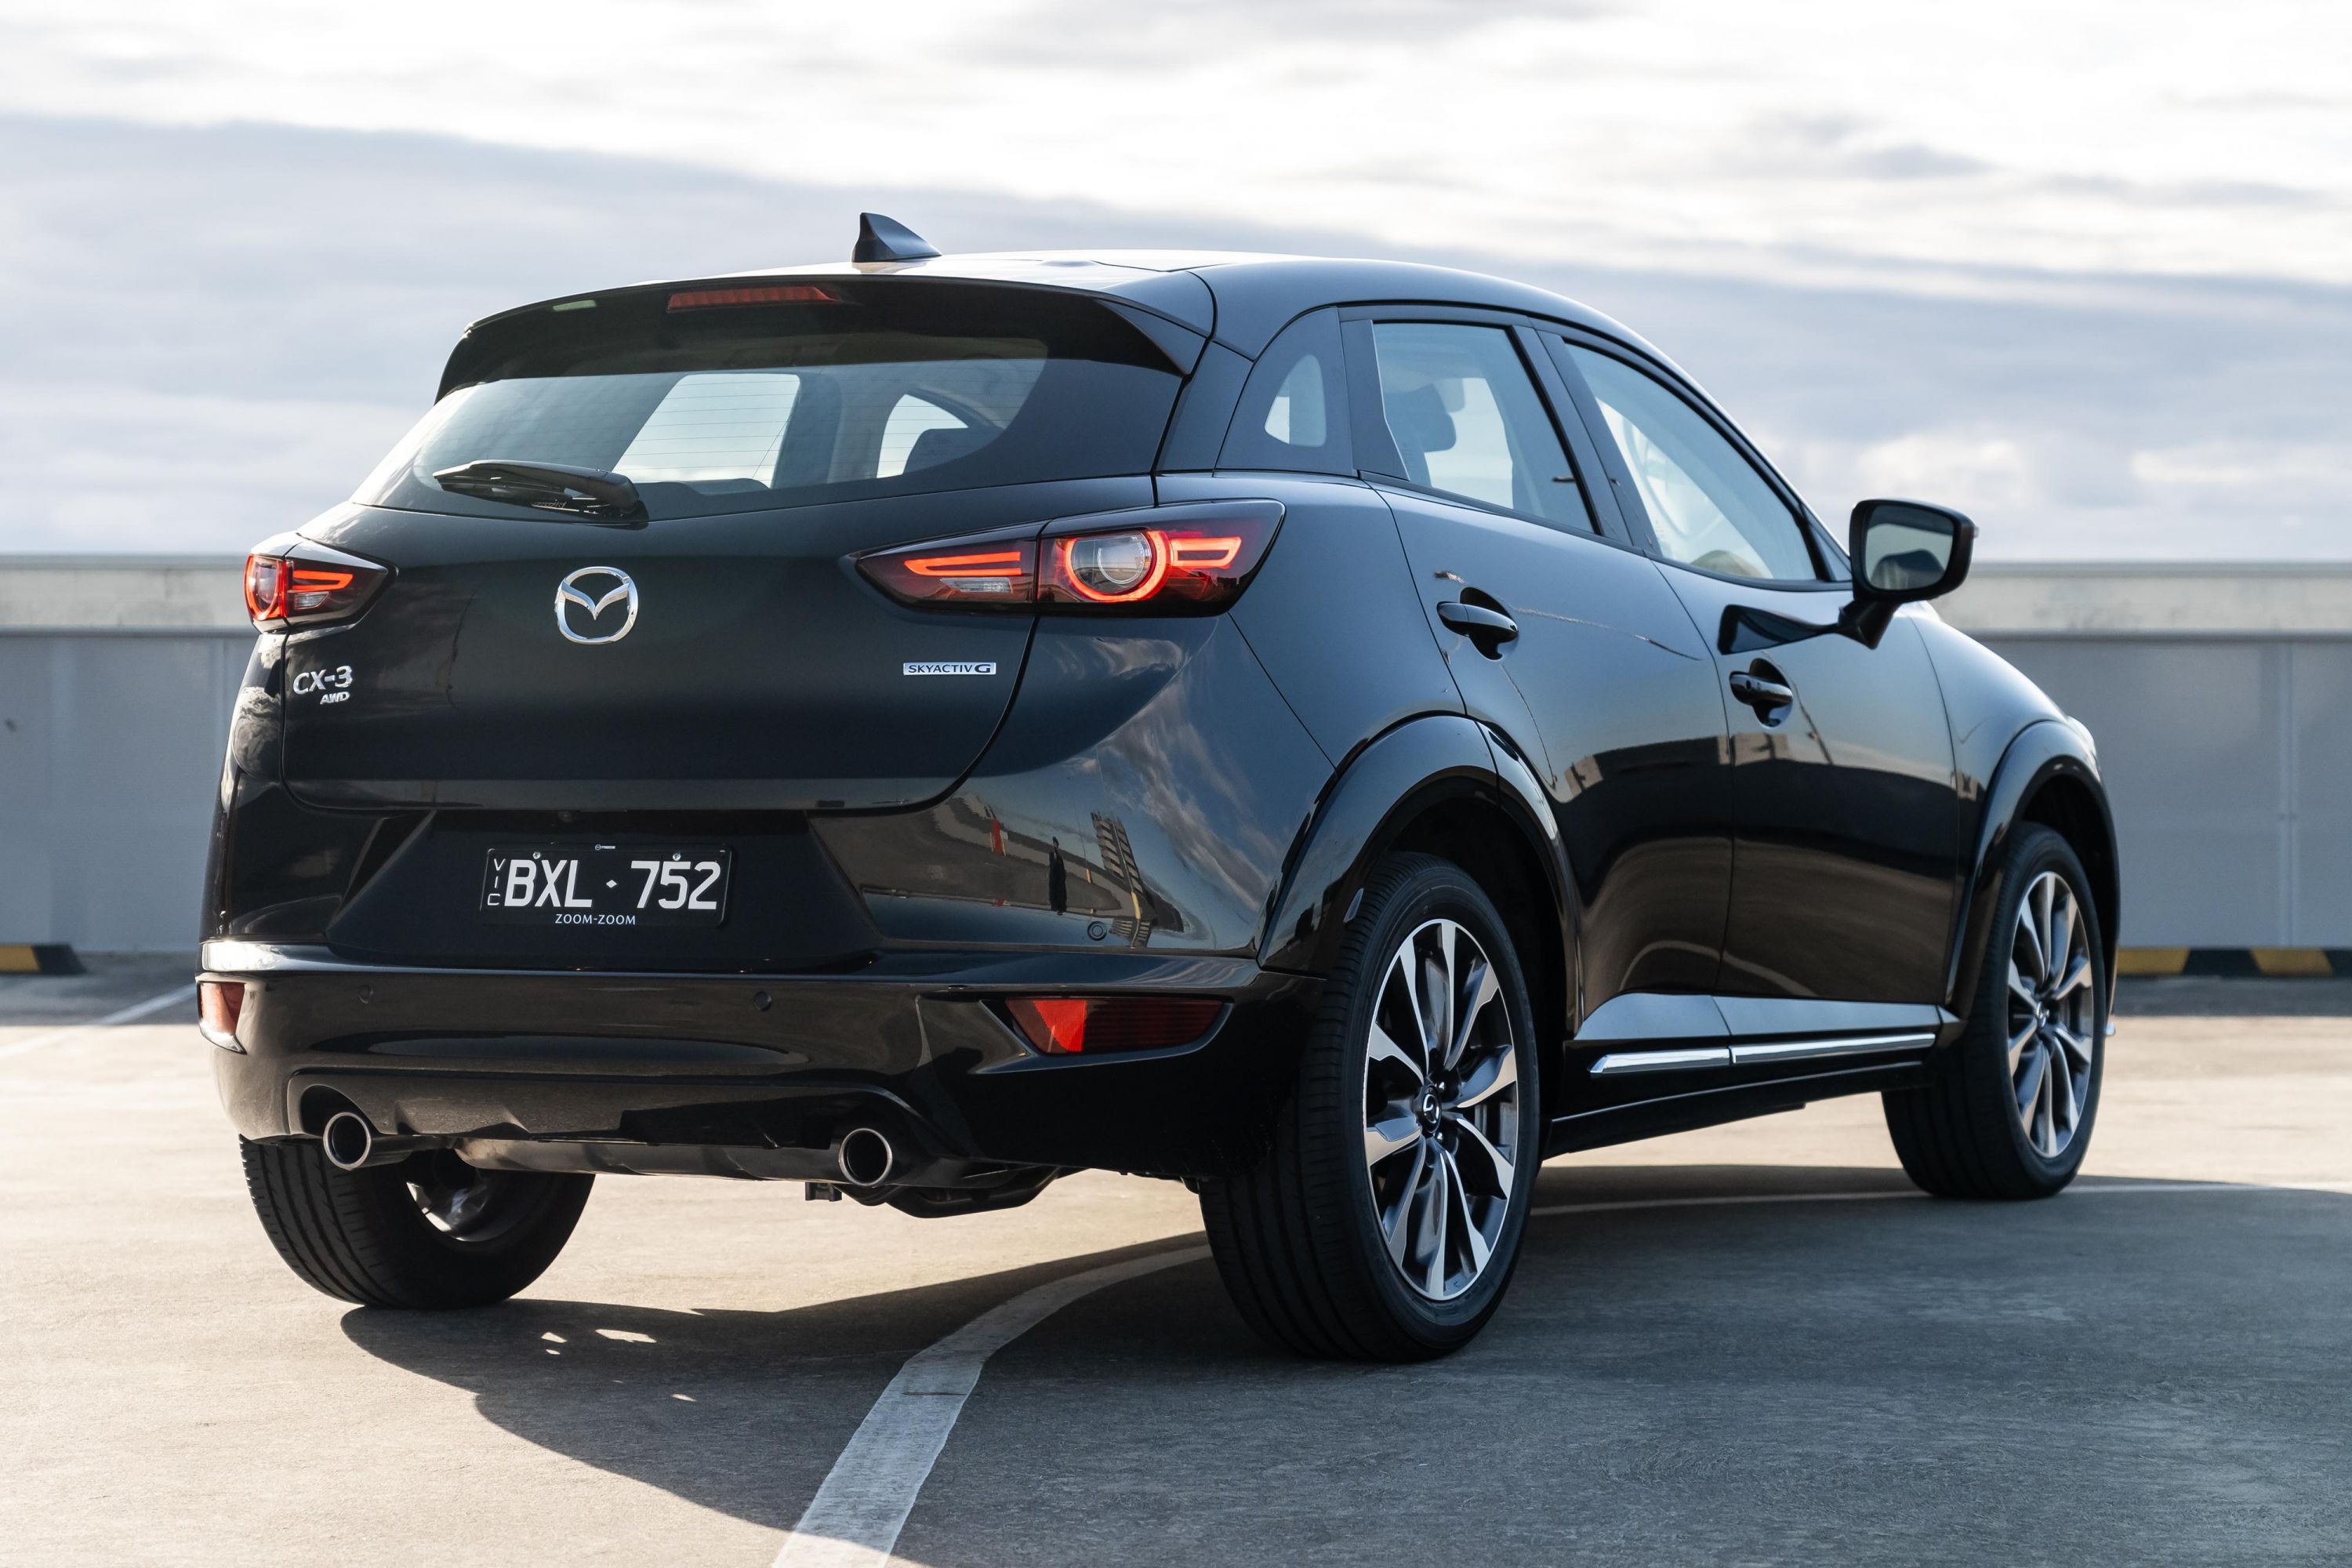 The Mazda CX-3 Interior Shows Off its Sporty Personality